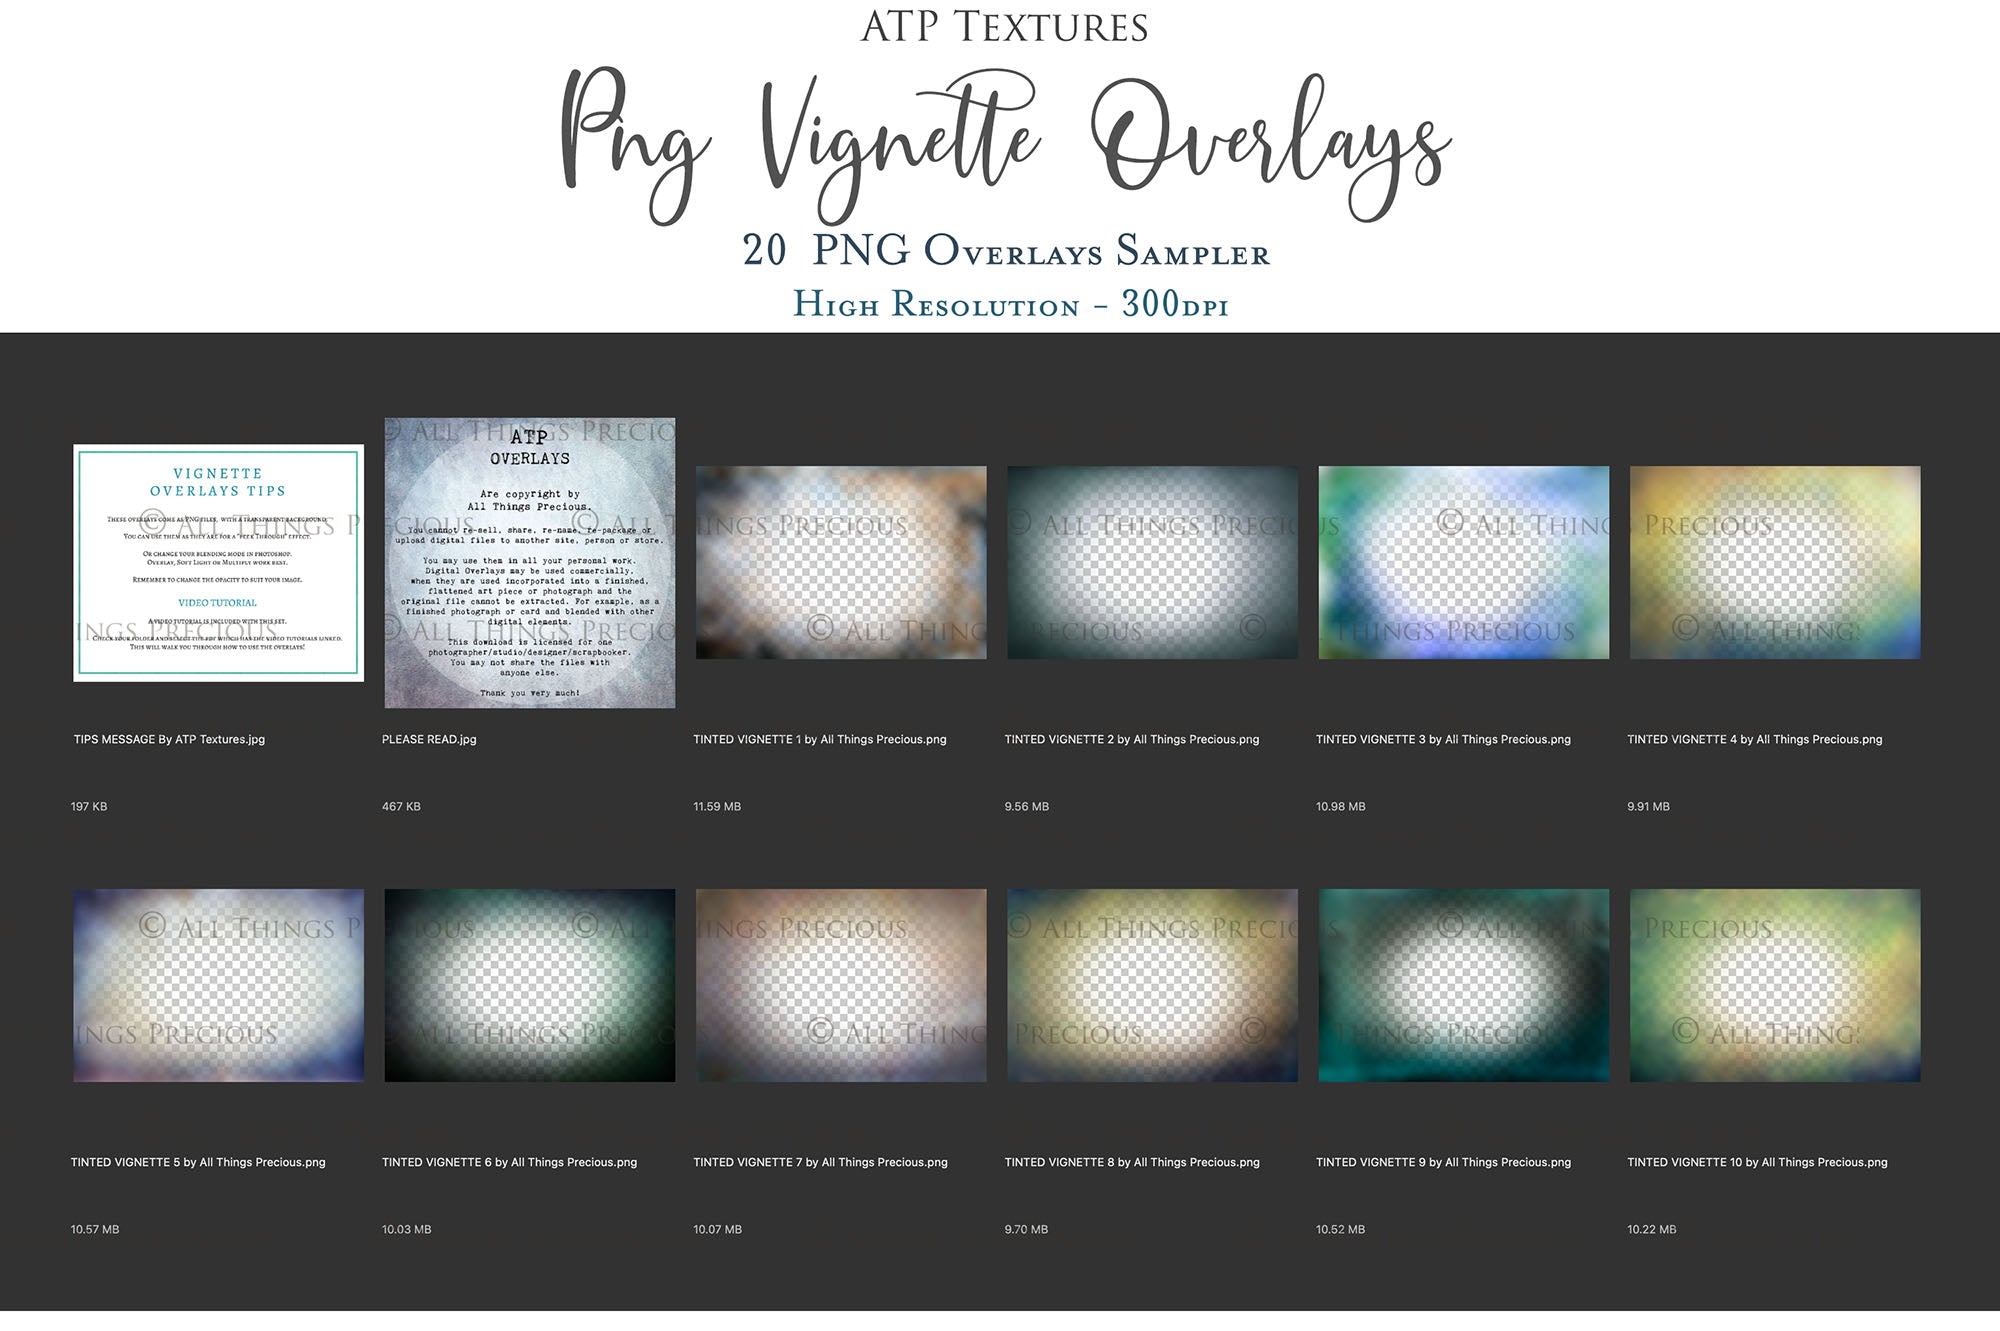 Png Overlays for photographers, Photoshop. Peek through Overlay, Vignette Overlays, Textures, High resolution, Digital Background by ATP textures.